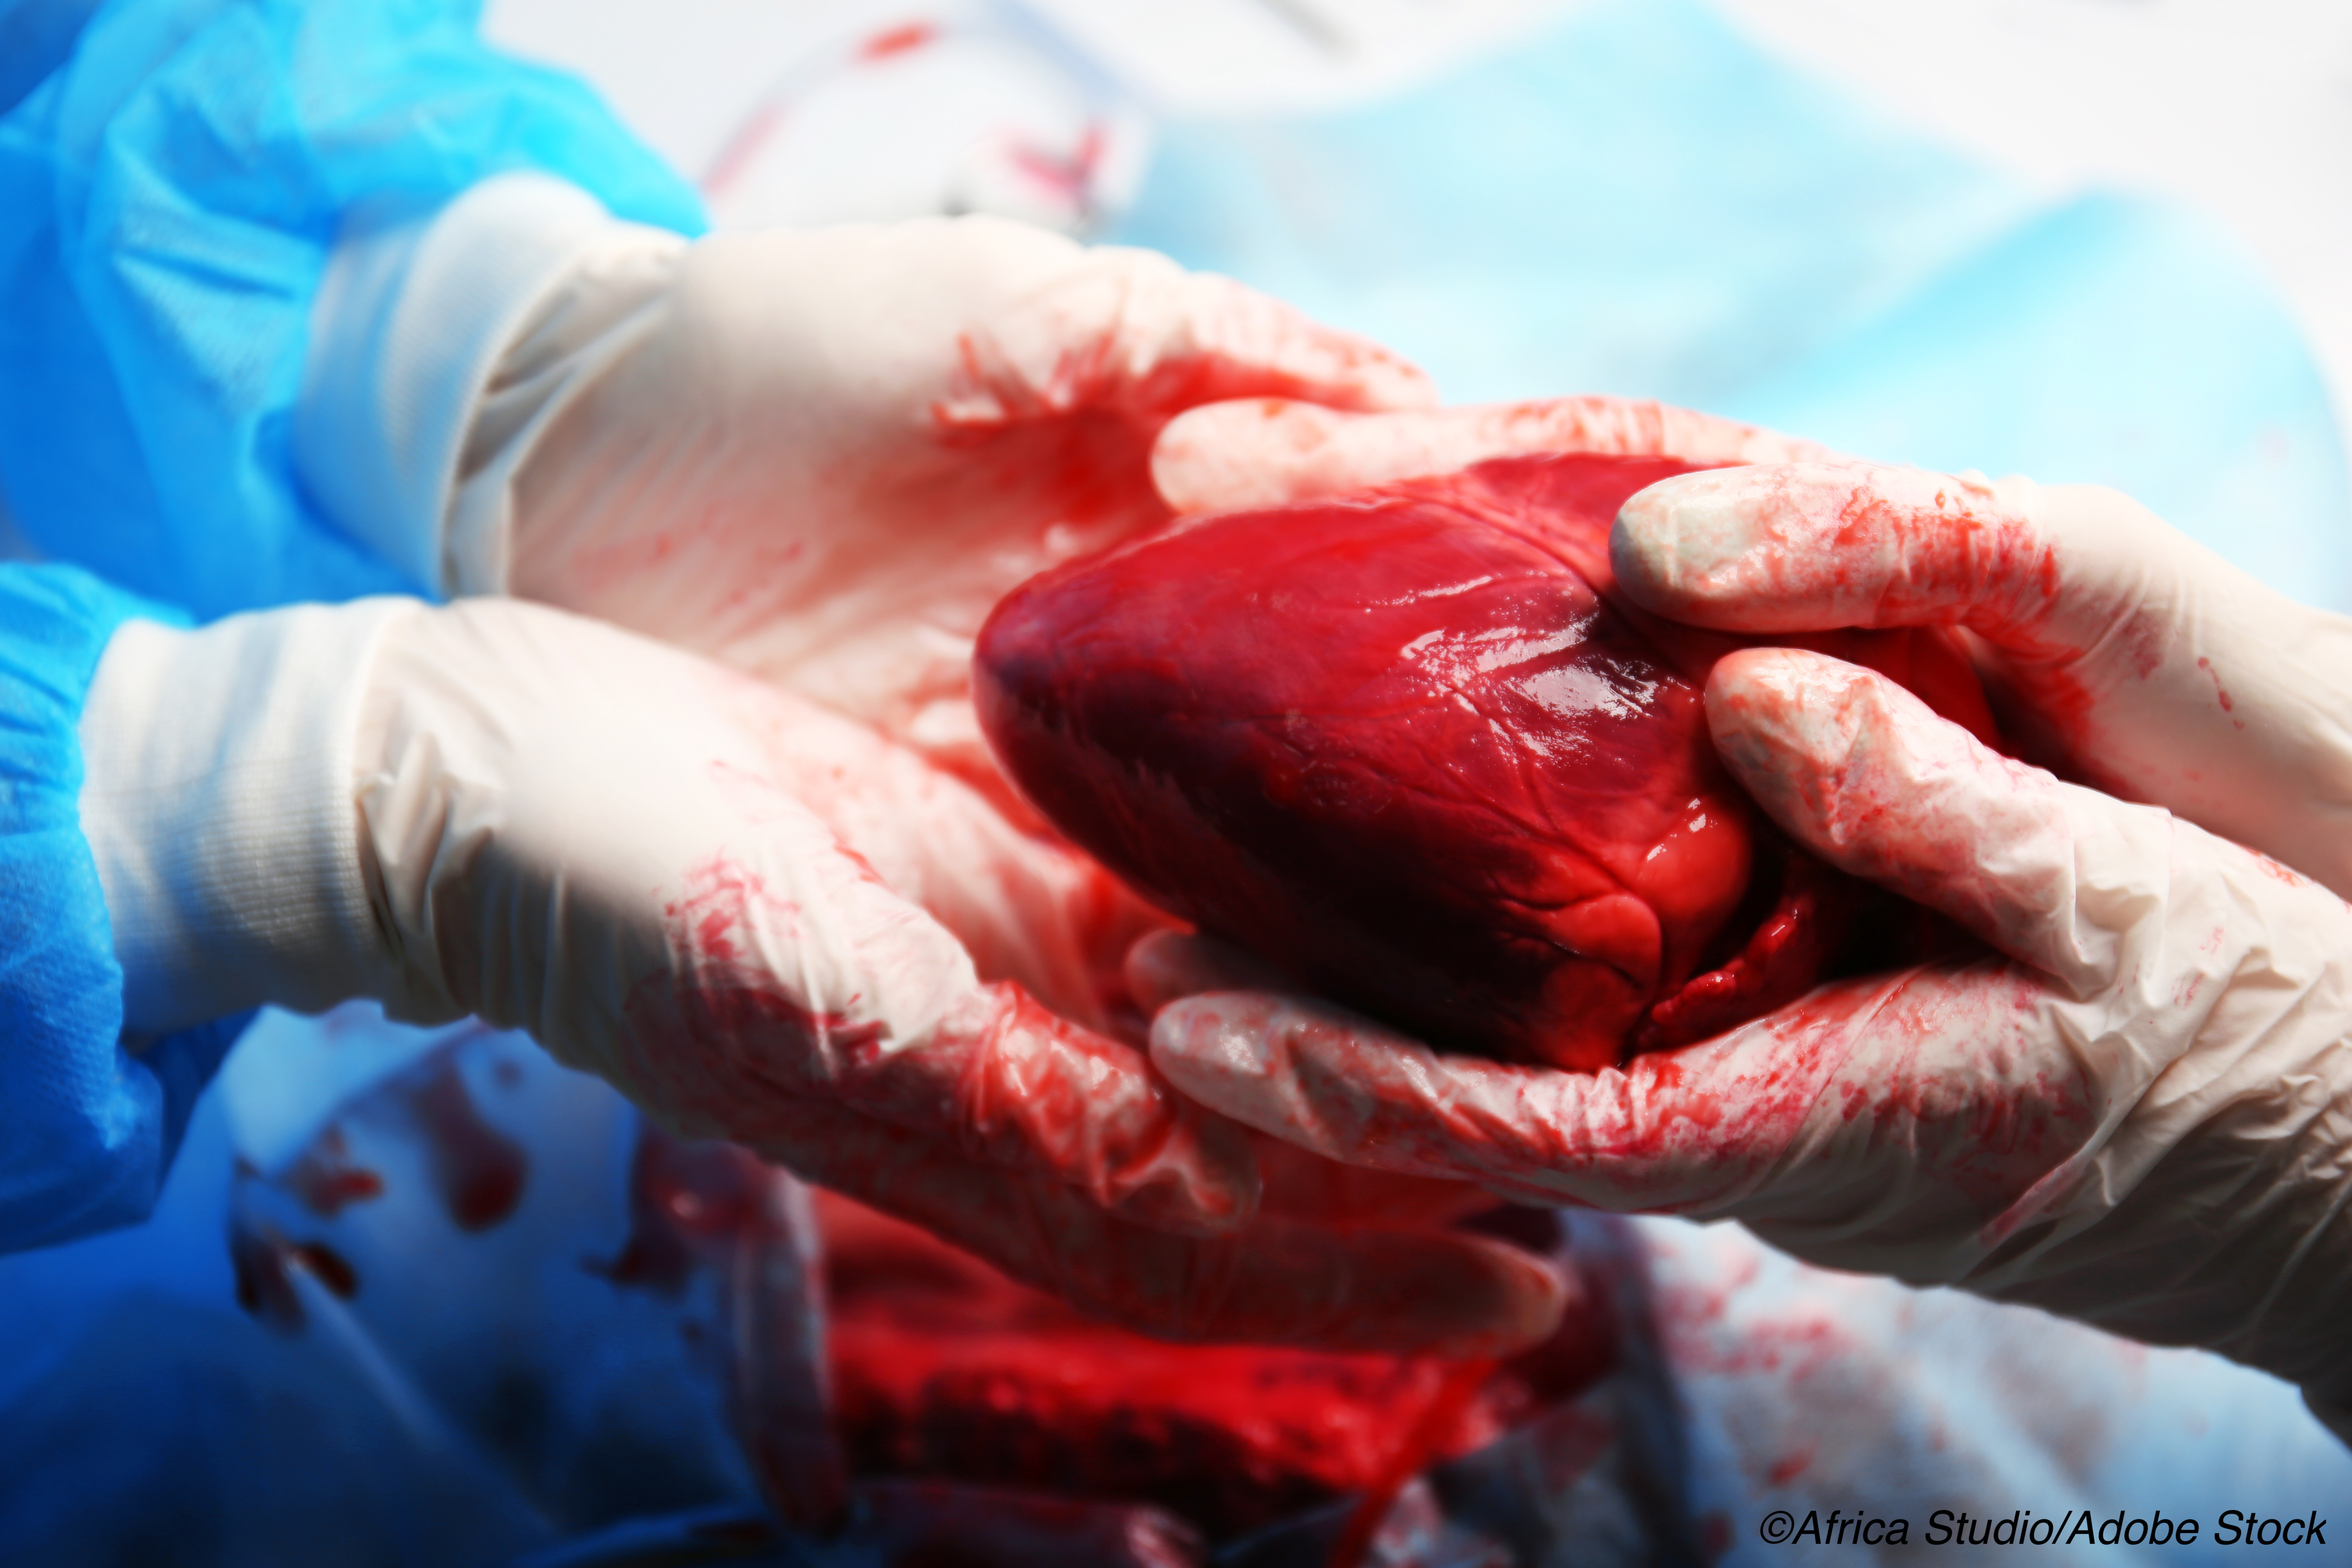 Heart Transplant: UNOS Policy Cut Wait Times, Mortality, but Post-transplant Survival Increased